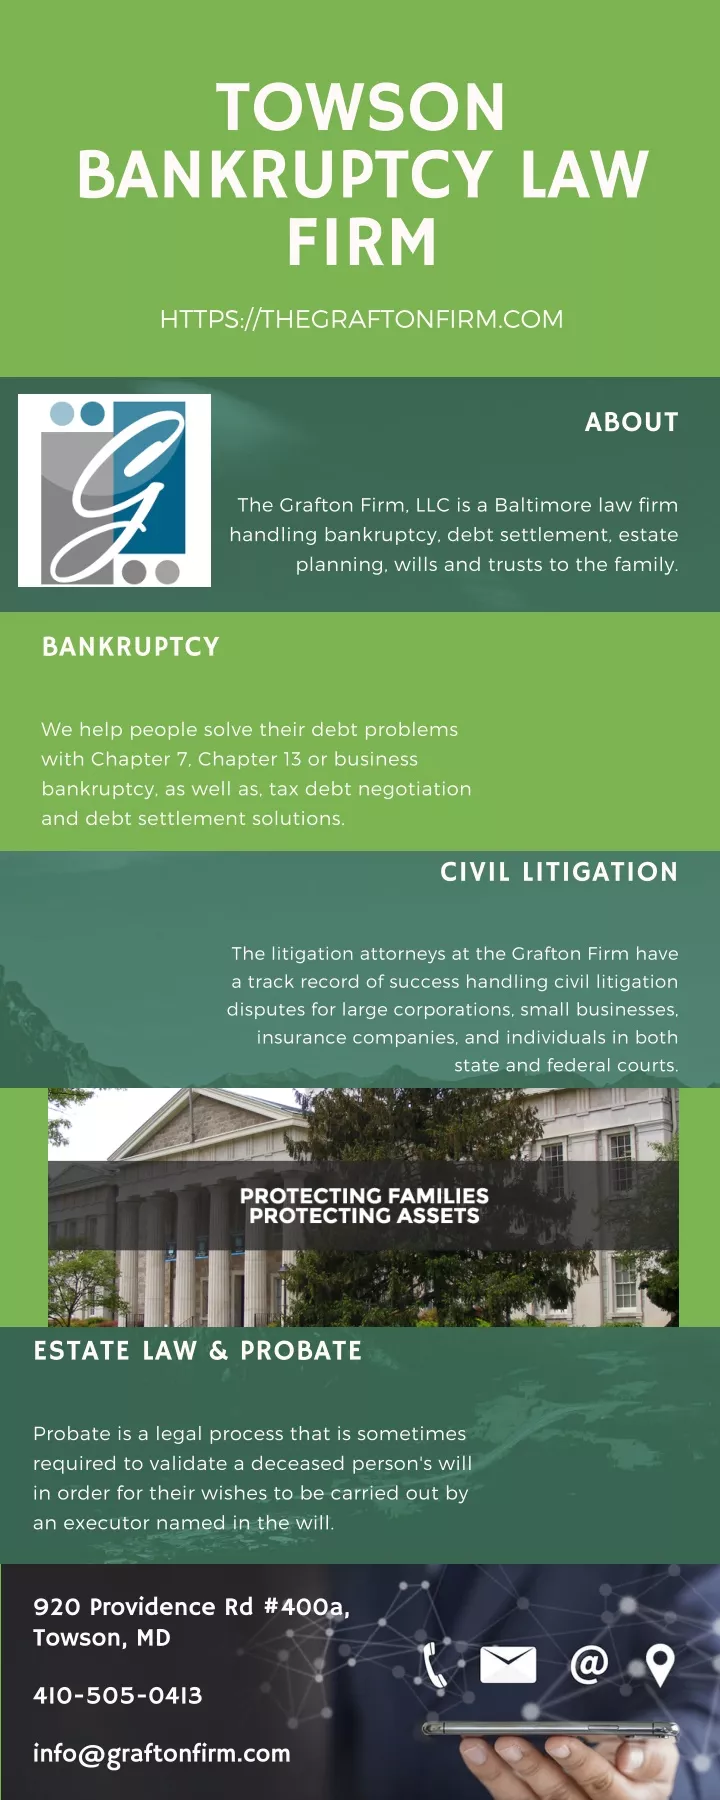 towson bankruptcy law firm